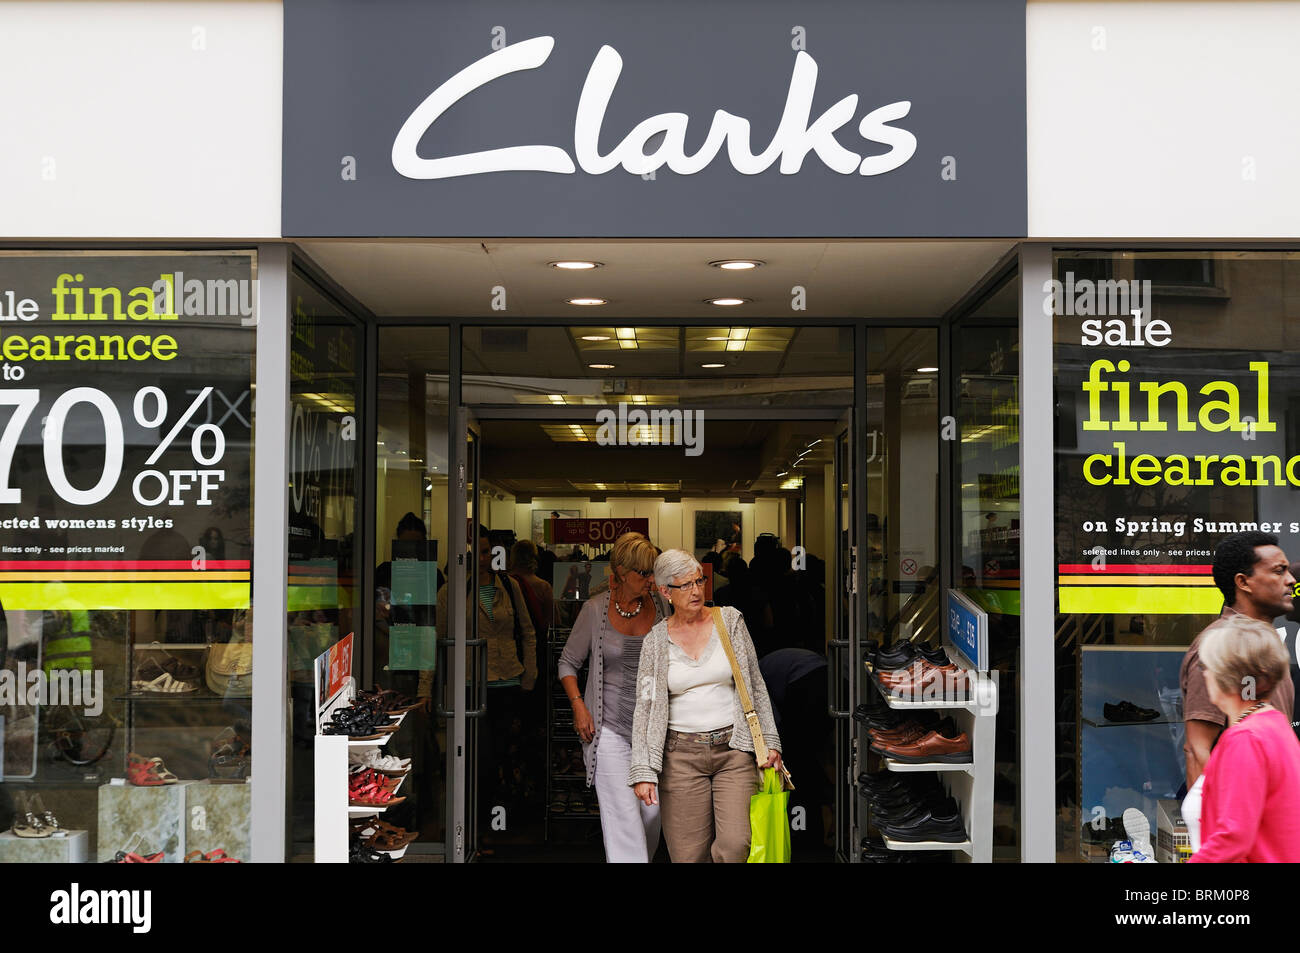 clarks store in england